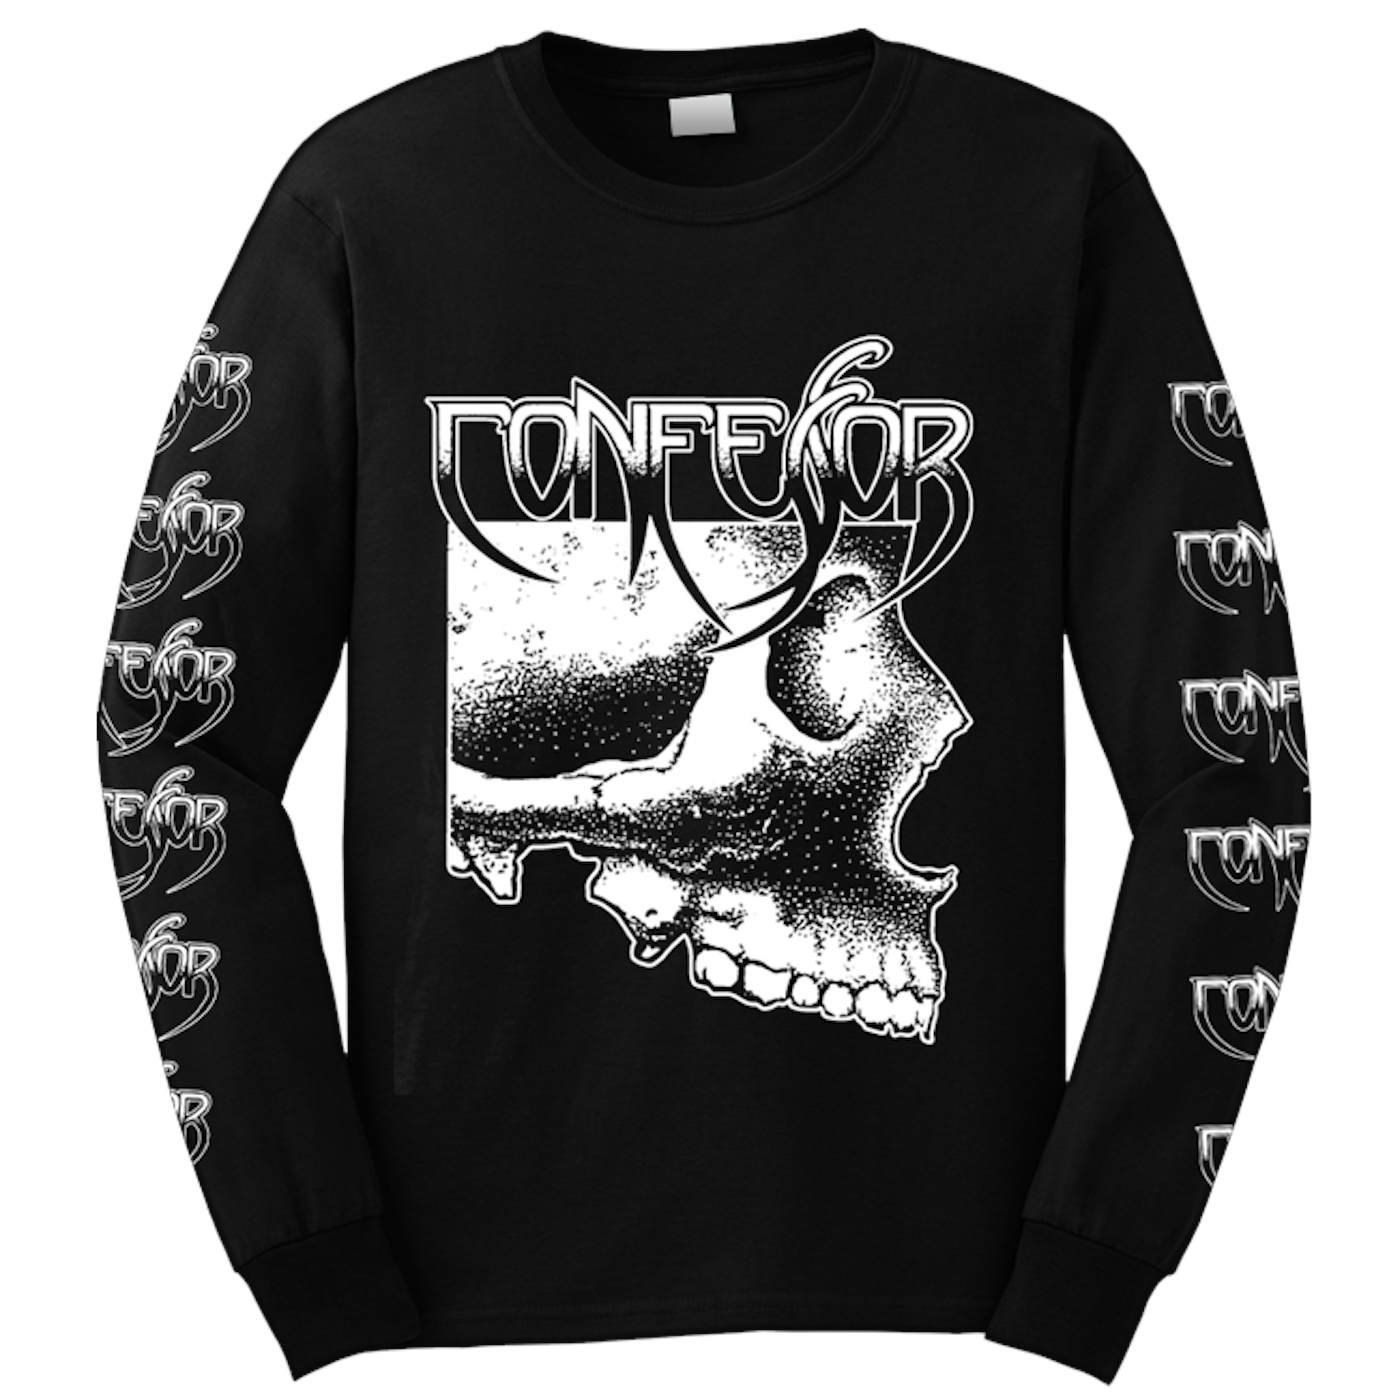 CONFESSOR - 'Condemned' Long Sleeve